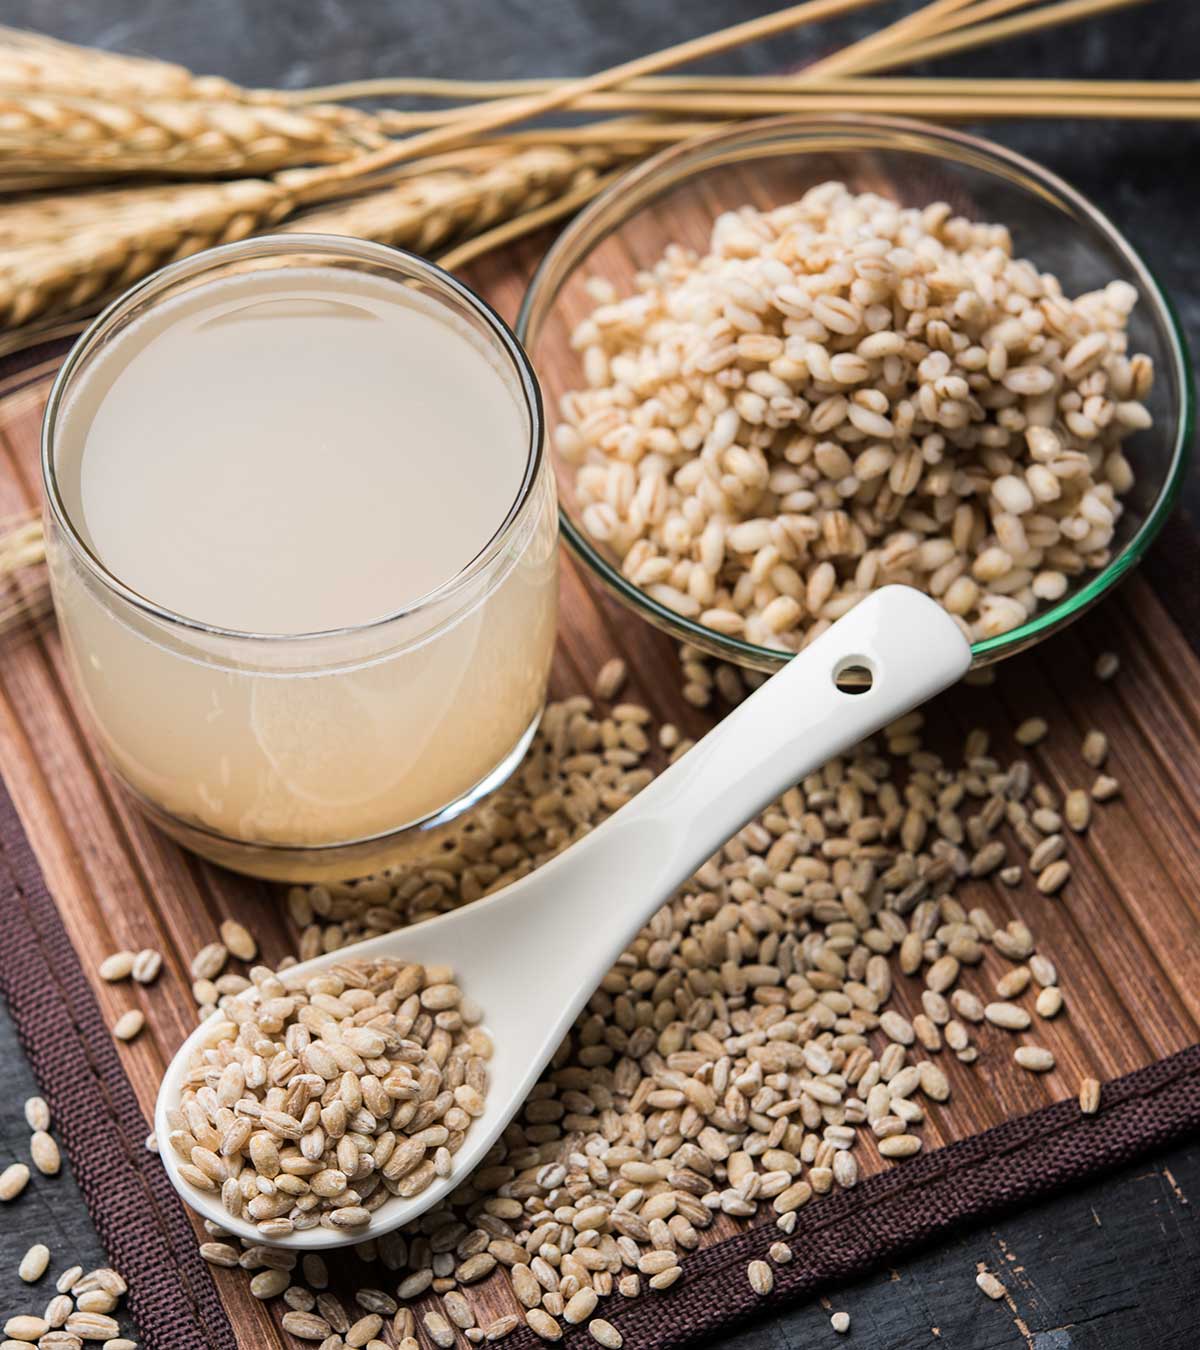 Barley During Pregnancy: Safety, Health Benefits And Risks